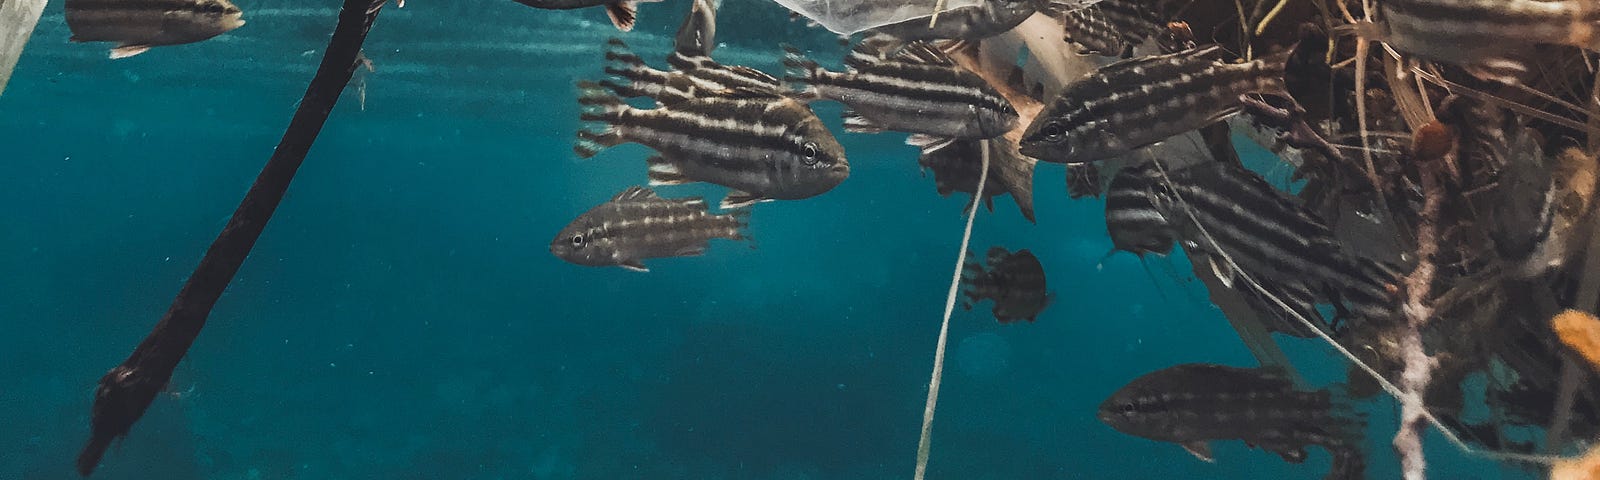 Plastic waste in the water surrounded by small black and white striped fish